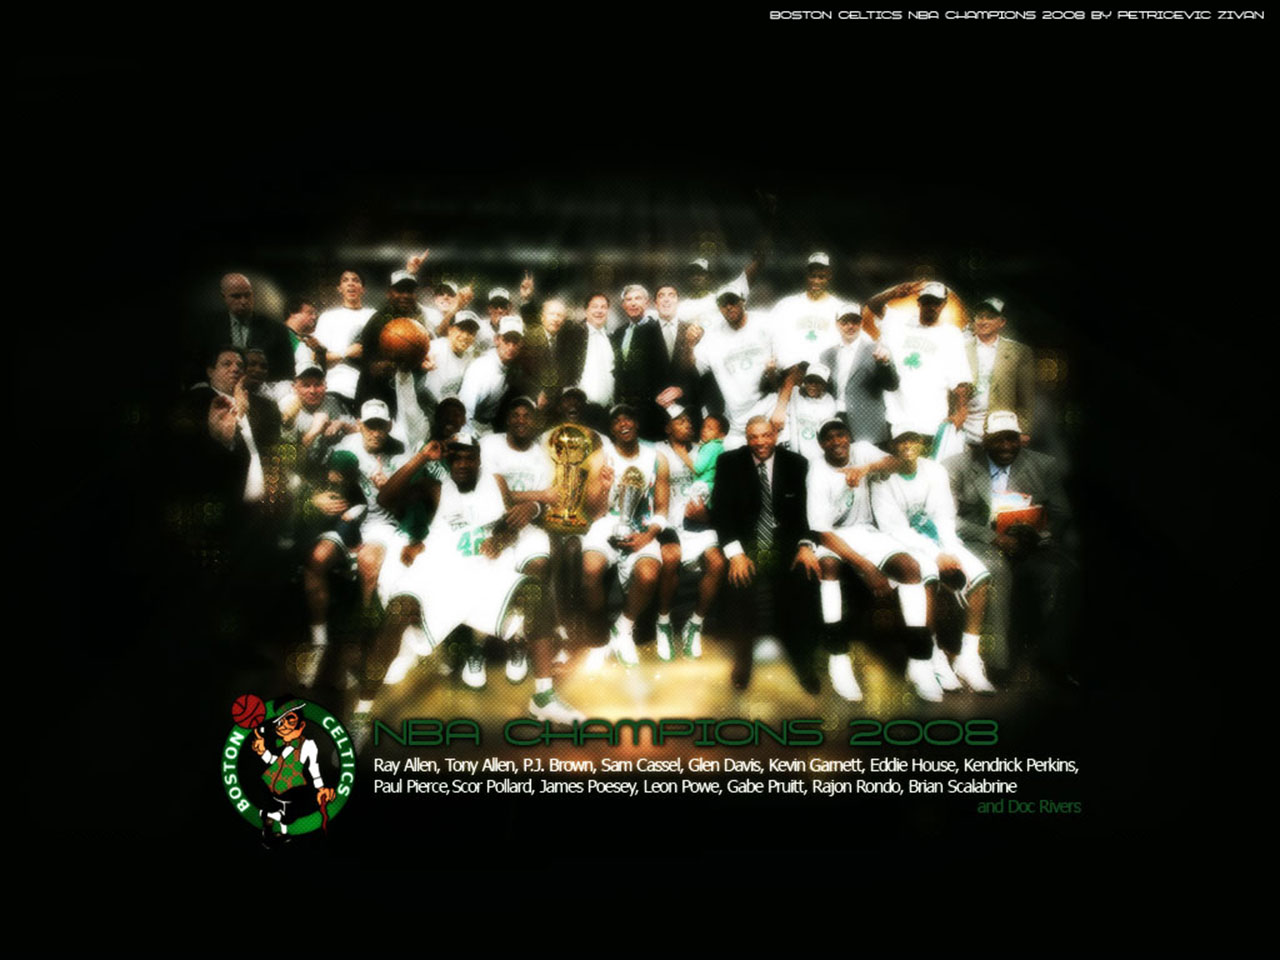 And the last one - wallpaper of Boston Celtics made of group team picture 